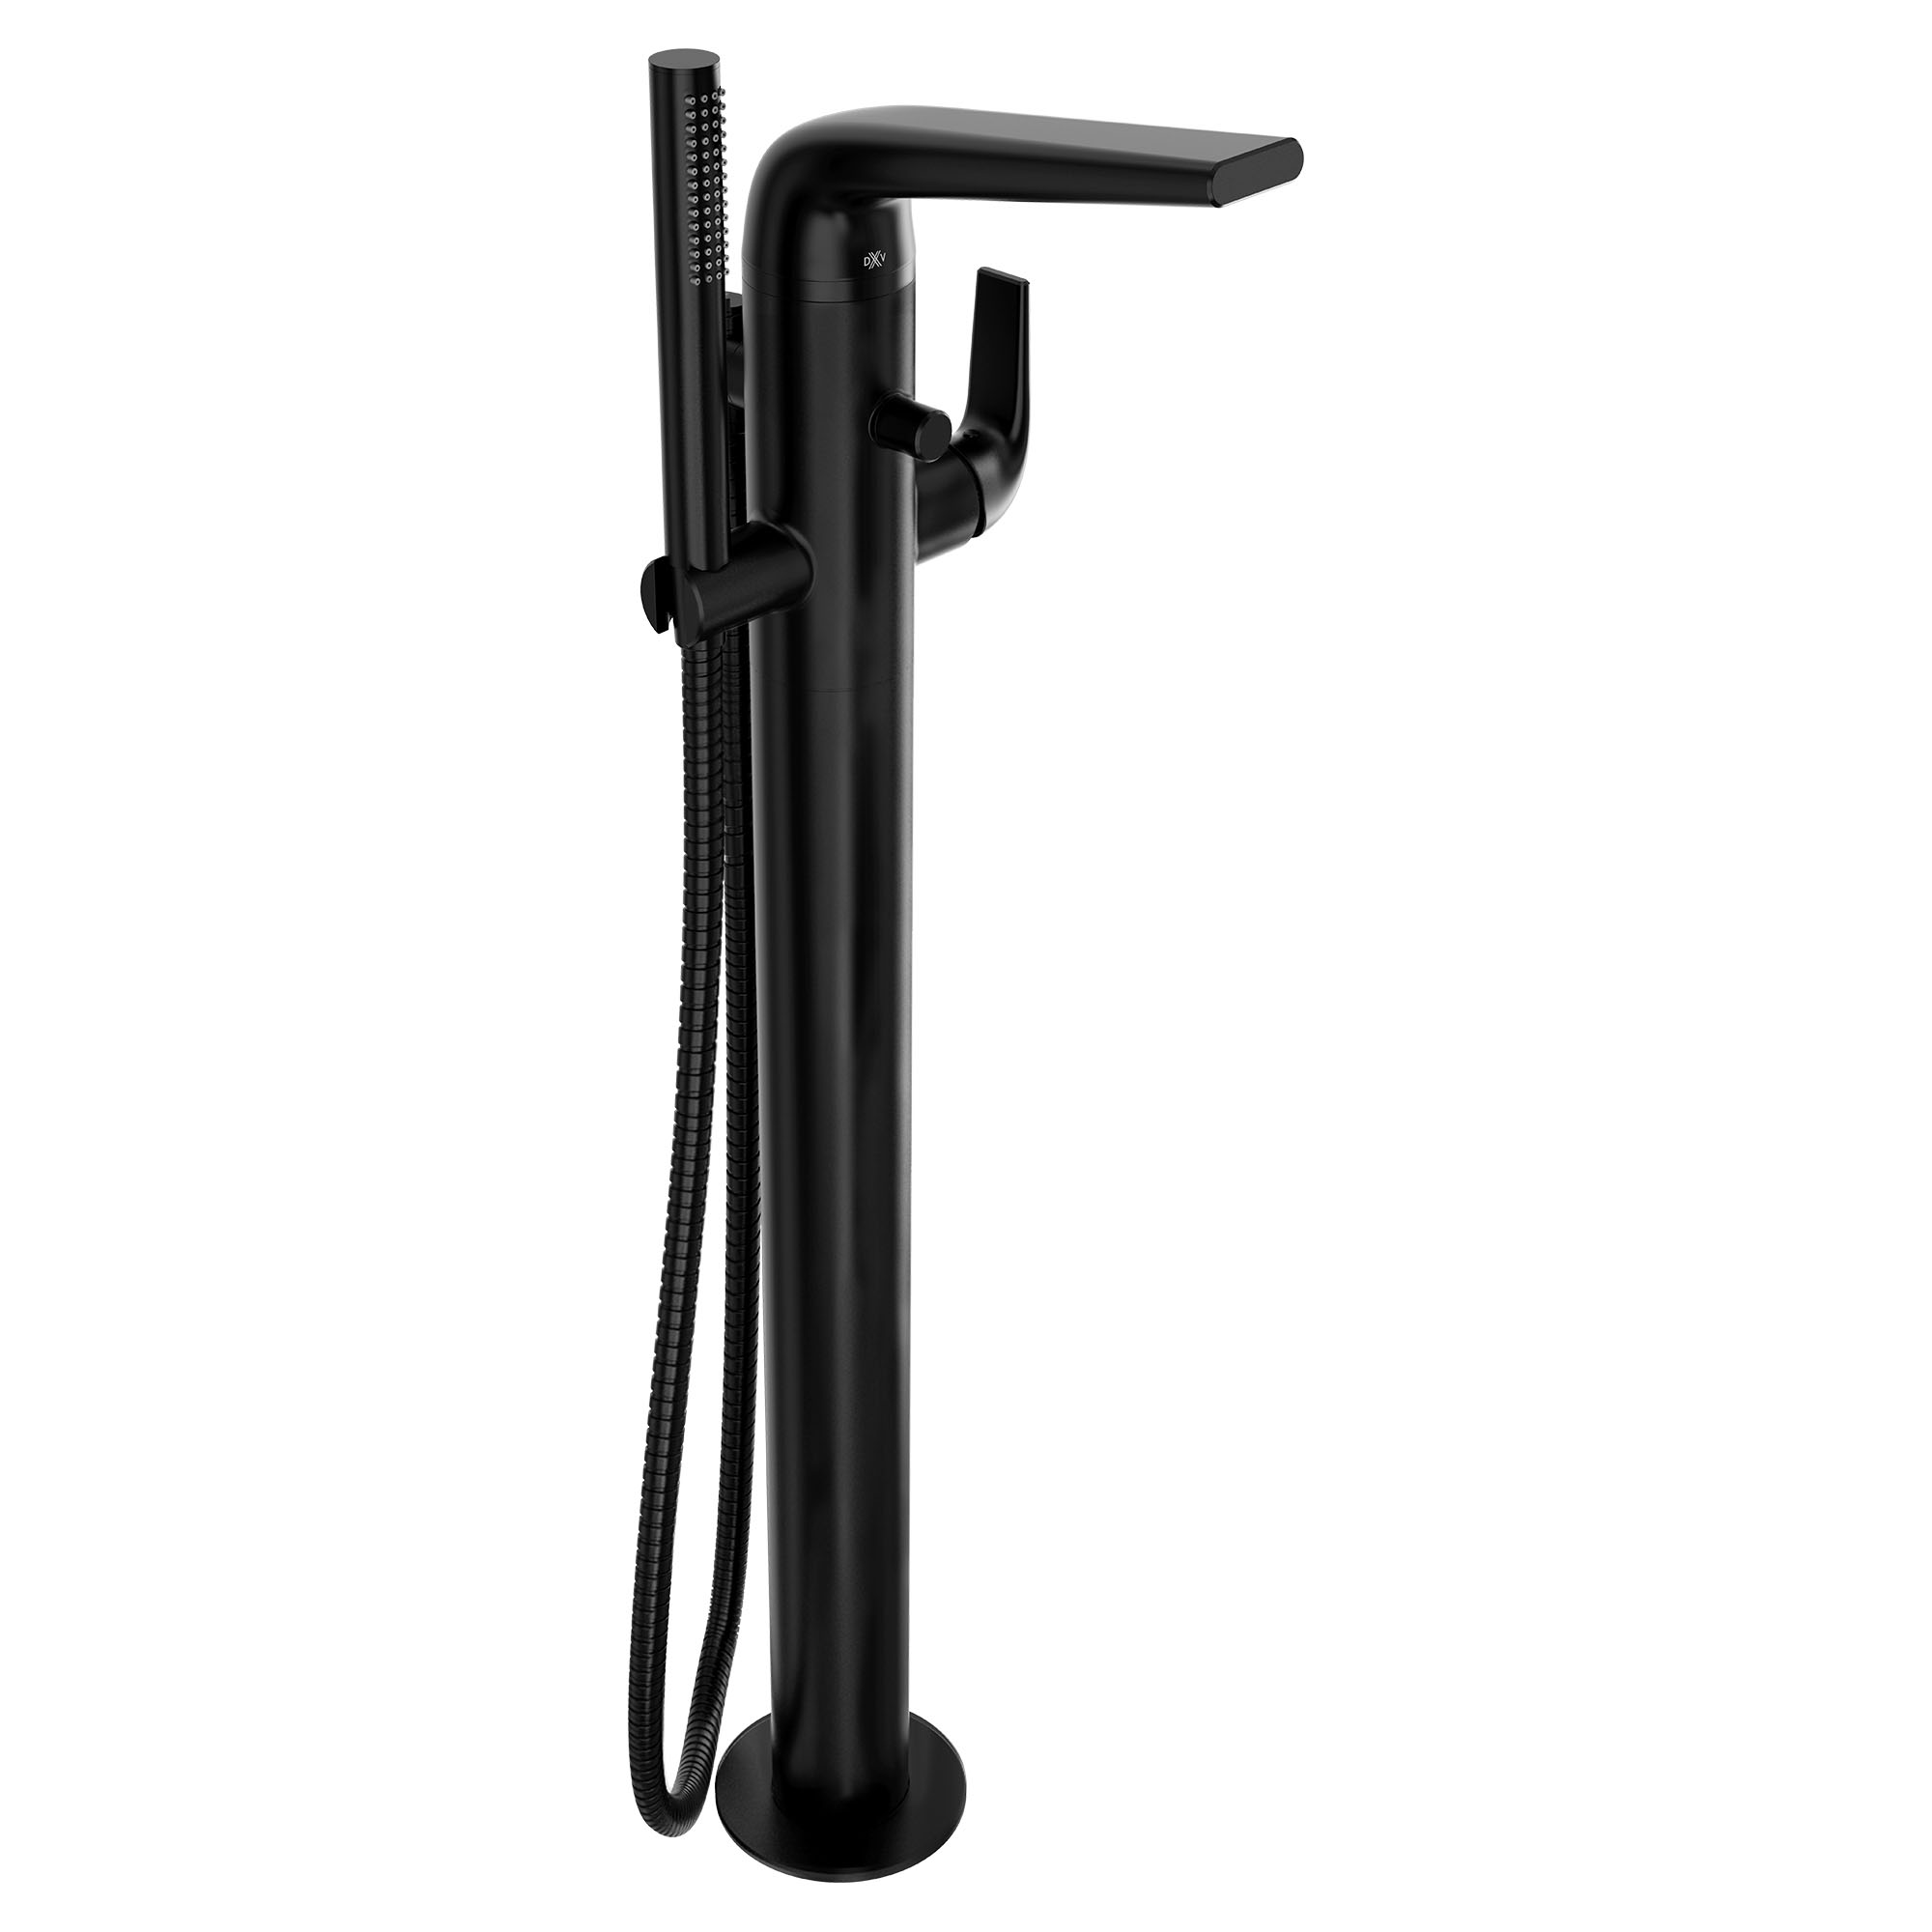 DXV Modulus® Single Handle Floor Mount Bathtub Filler with Hand Shower and Lever Handle